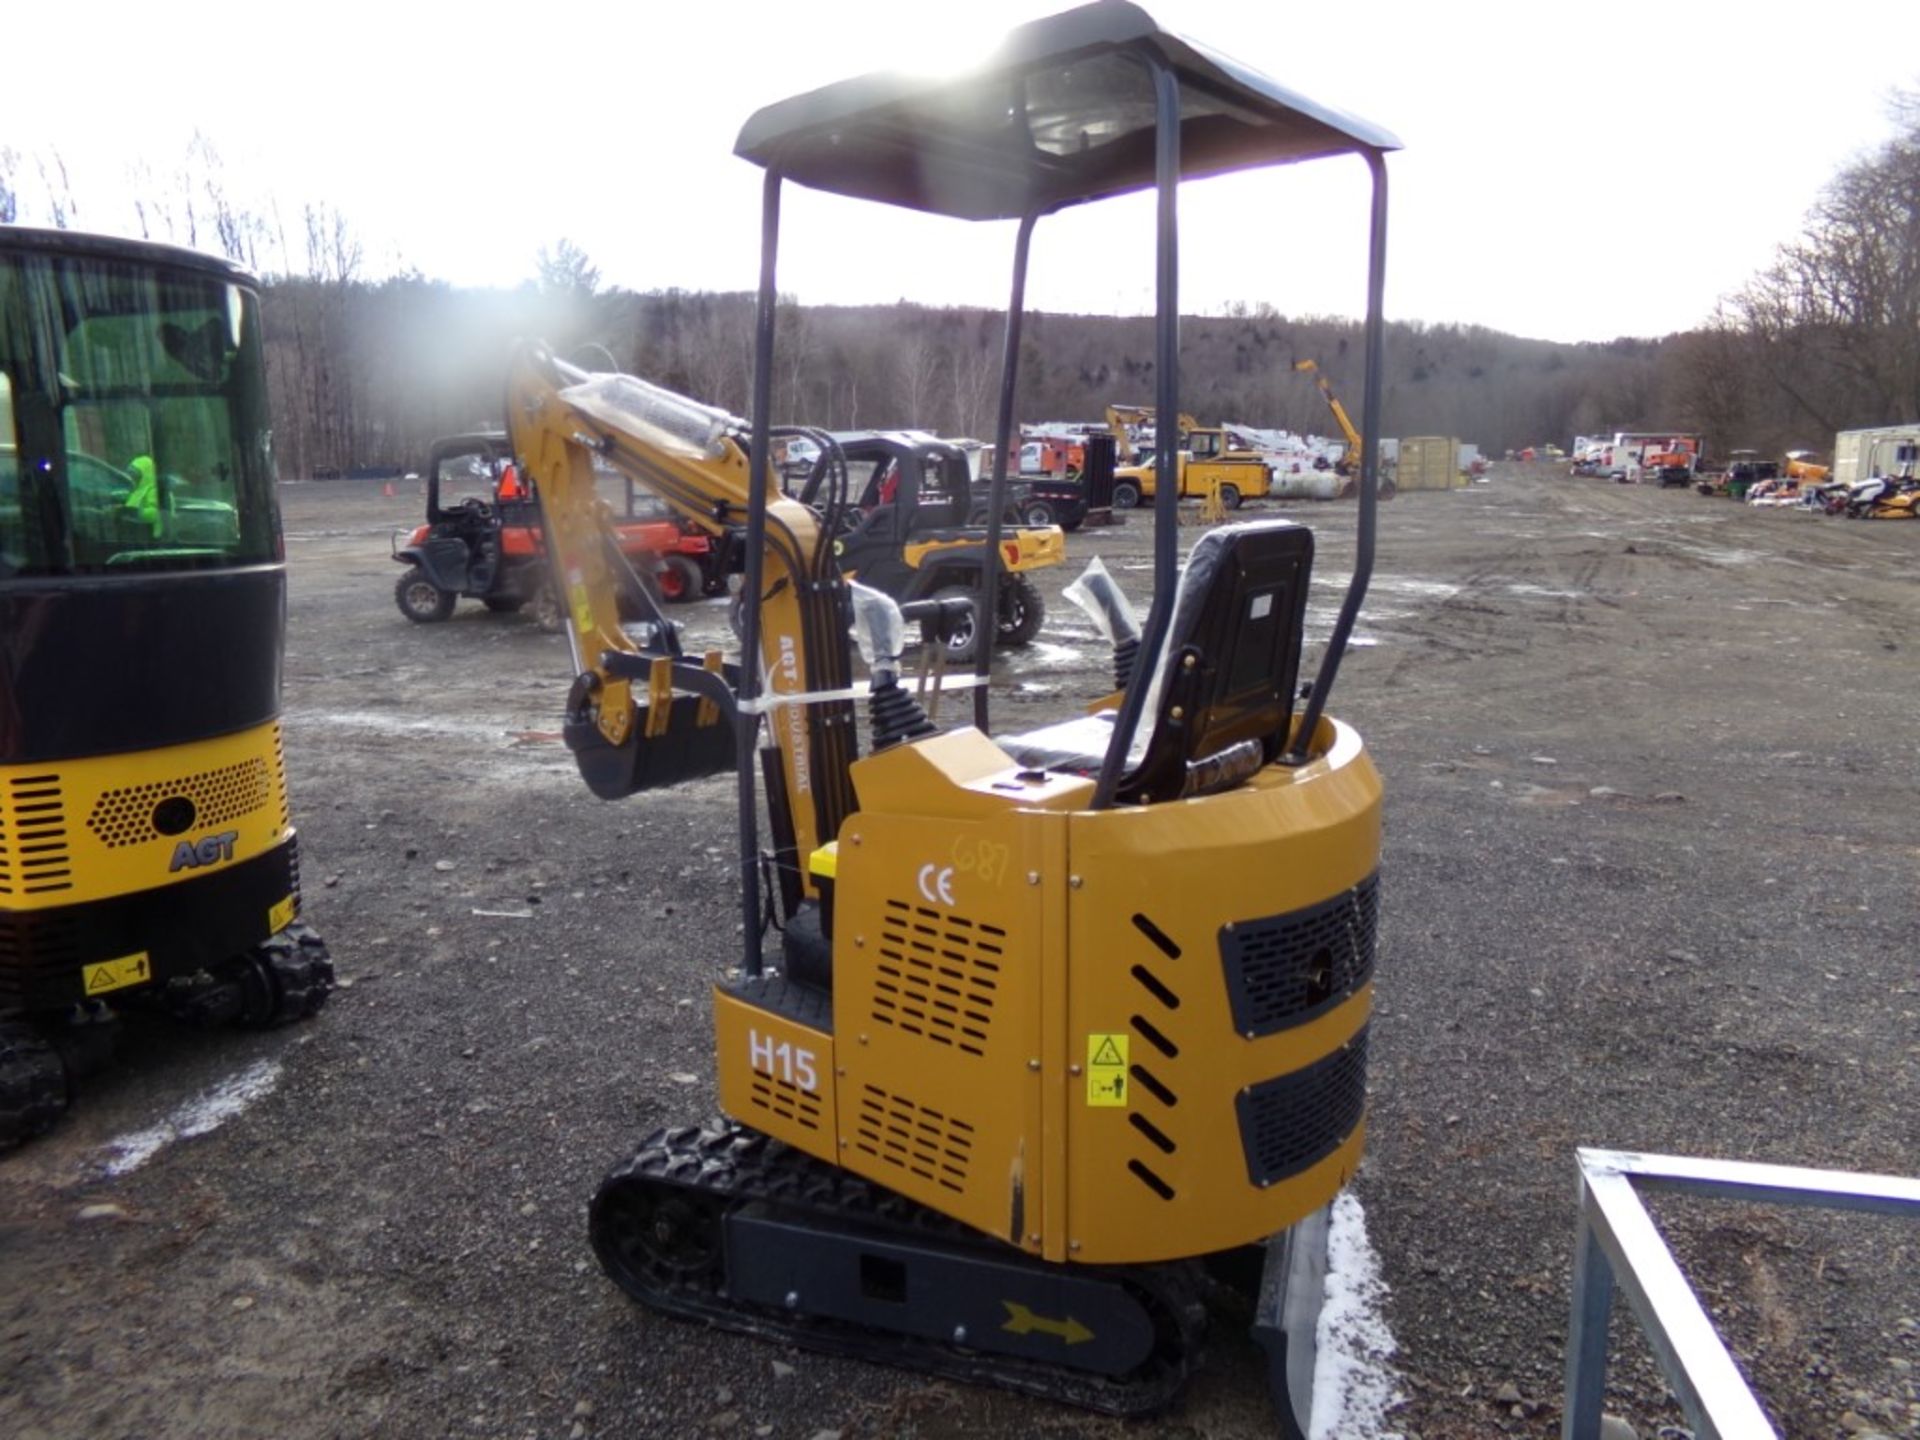 New AGT Industrial H15 Mini Excavator Canopy, Stationary Thumb, Grader Blade, Gas Engine, Industrial - Image 2 of 5